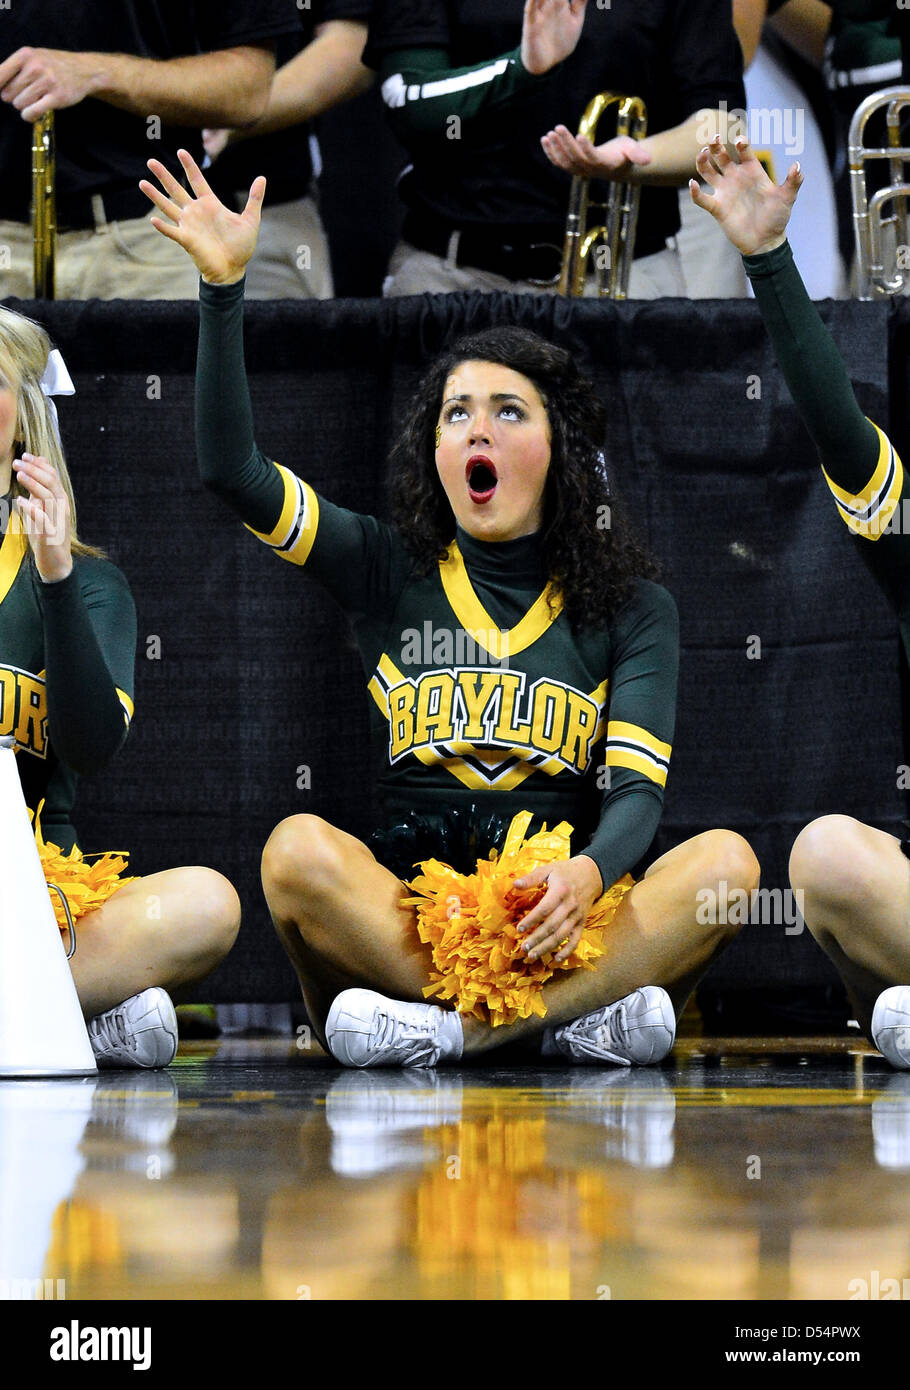 March 24, 2013 - Waco, TX, U.S - March 24, 2013..Baylor cheerleader react during first round of NCAA Women's Basketball regional tournament at Ferrell Center in Waco, TX. Baylor defeat Prairie A&M 82-40 to advance to the second round. Stock Photo